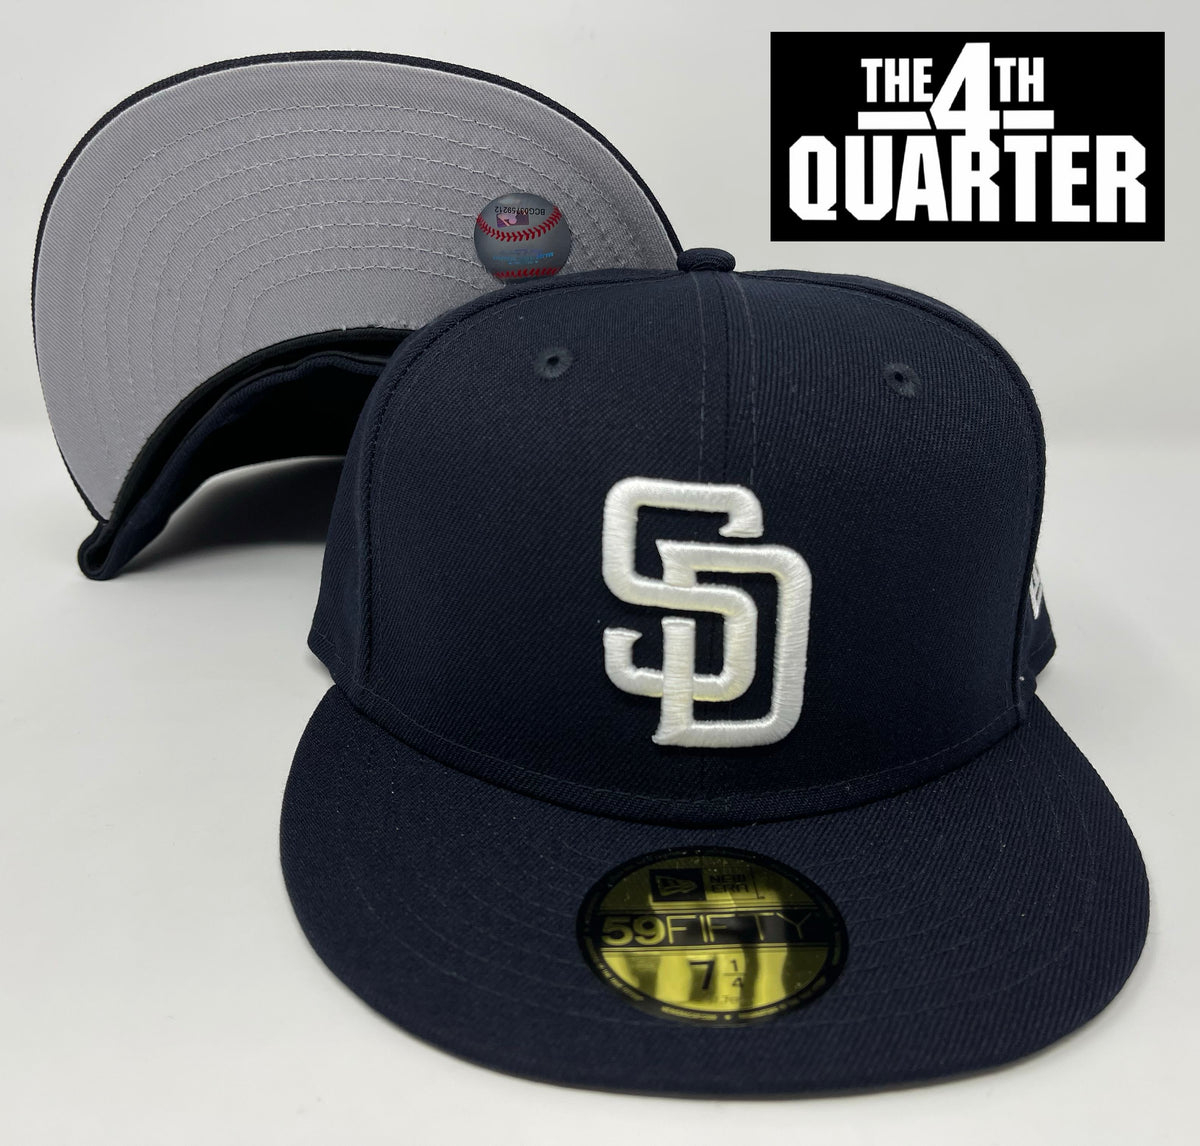 San Diego Padres Fitted New Era 59FIFTY Navy Cap Hat GREY UV